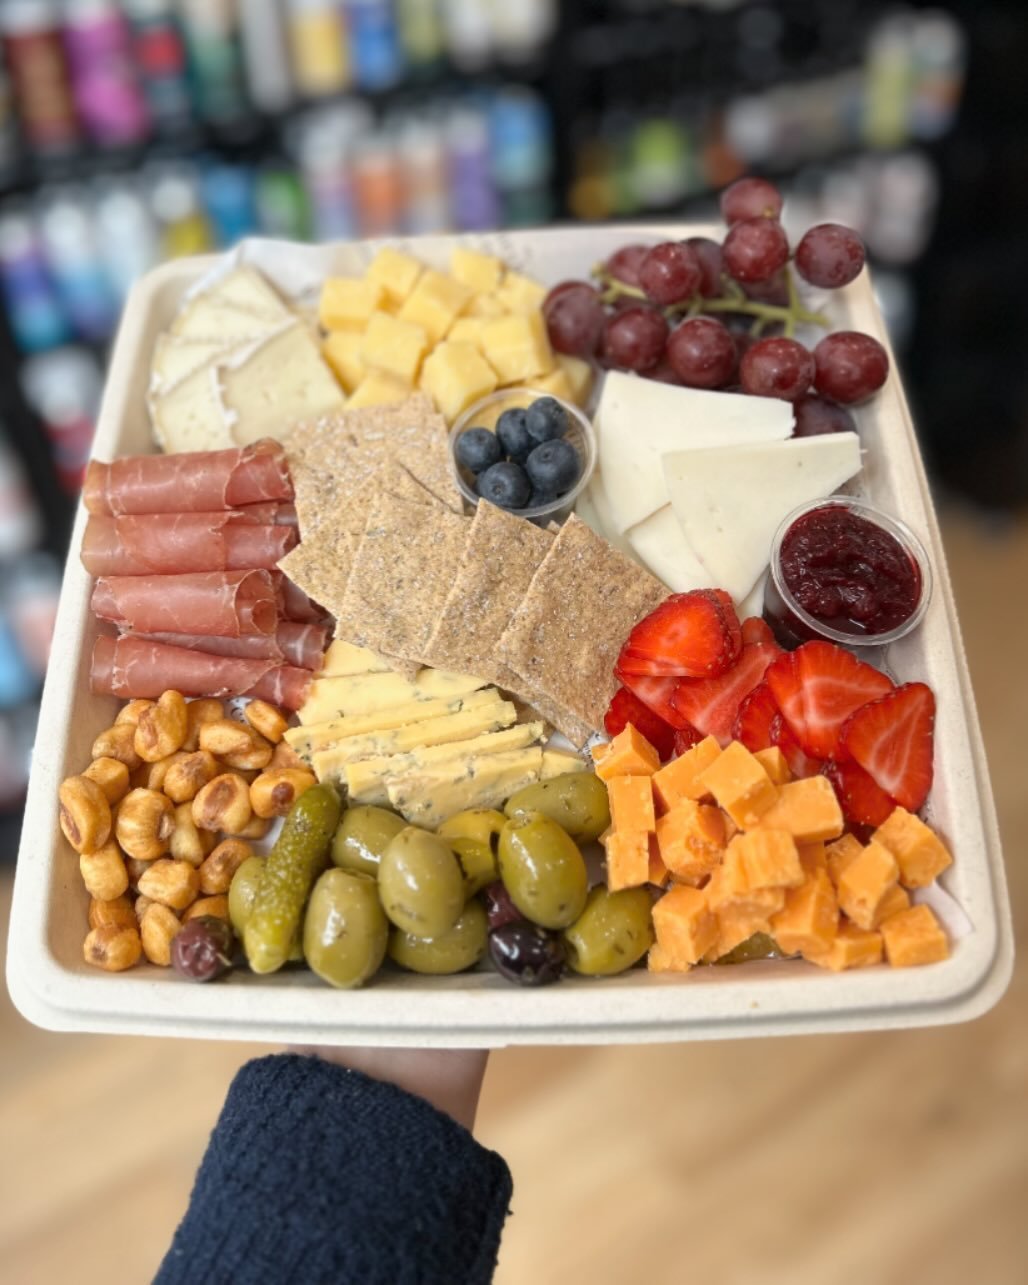 Happy Friday everyone! We may be biased but we think Friday calls for a beverage and a delicious cheese platter. What a better way to start the weekend?

We want to know&mdash; would you like to see these platters available to order? Let us know in t